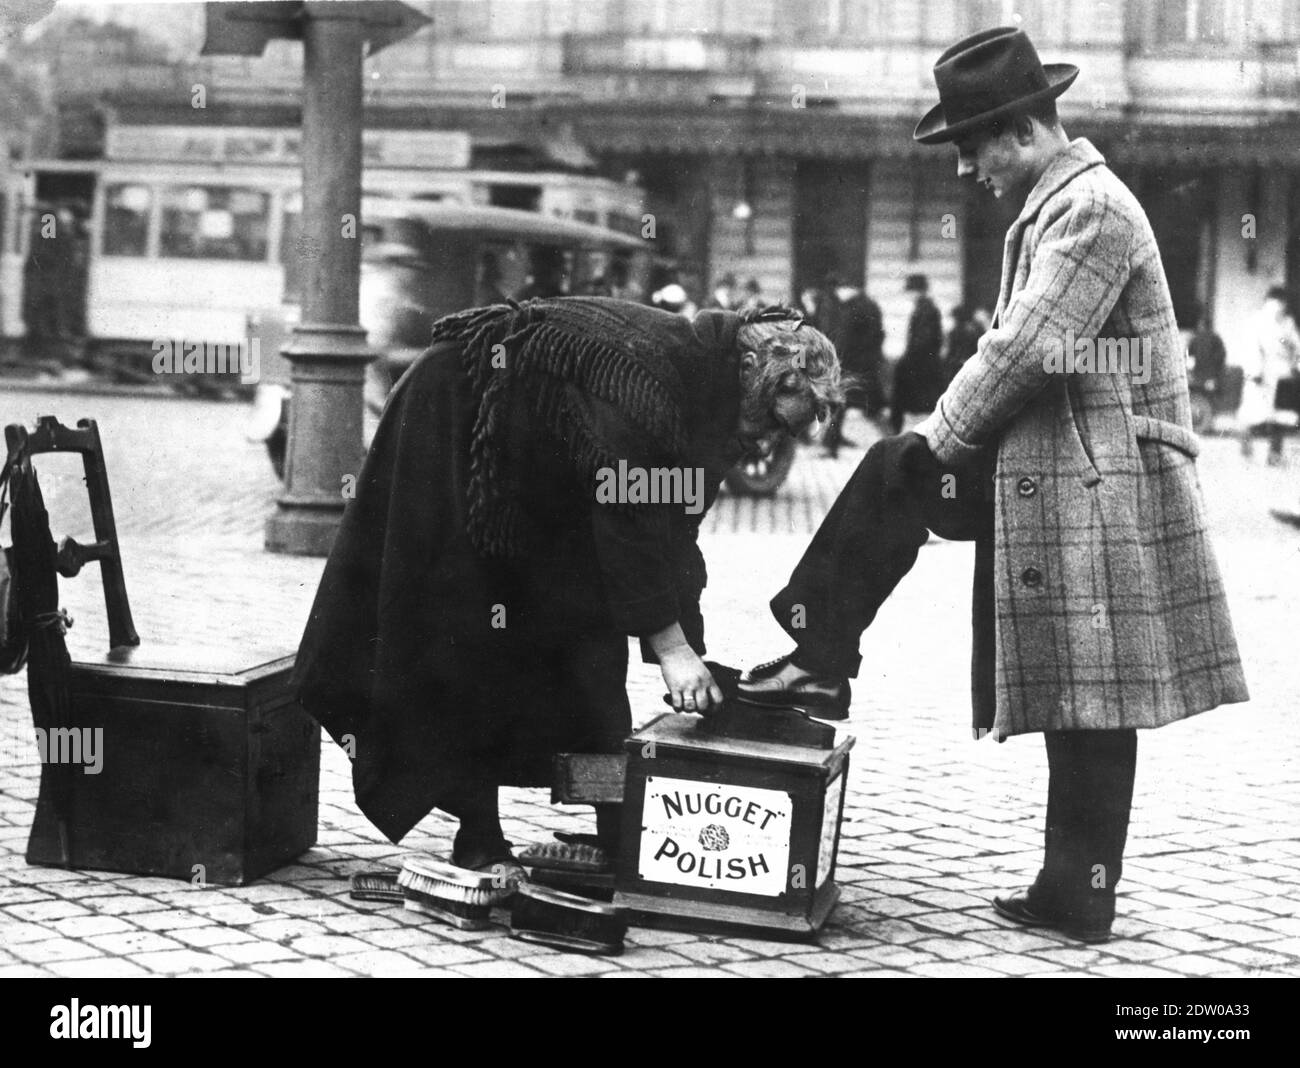 In a busy city street of Brussels, Belgium in the 1920s, a grey-haired old woman is bending over to shine the leather shoes of a young man.  She, hatless, is dressed in a black winter coat covered by a black shawl. He is dressed in a fine wool overcoat, homberg hat and black trousers. The woman has several brushes and a chair behind her. The man's foot is on a box clearly marked 'Nugget Polish'  The city street is quite busy, with public transit and people walking and waiting nearby.   To see my other interesting images of women, search:  prestor  vintage  woman Stock Photo